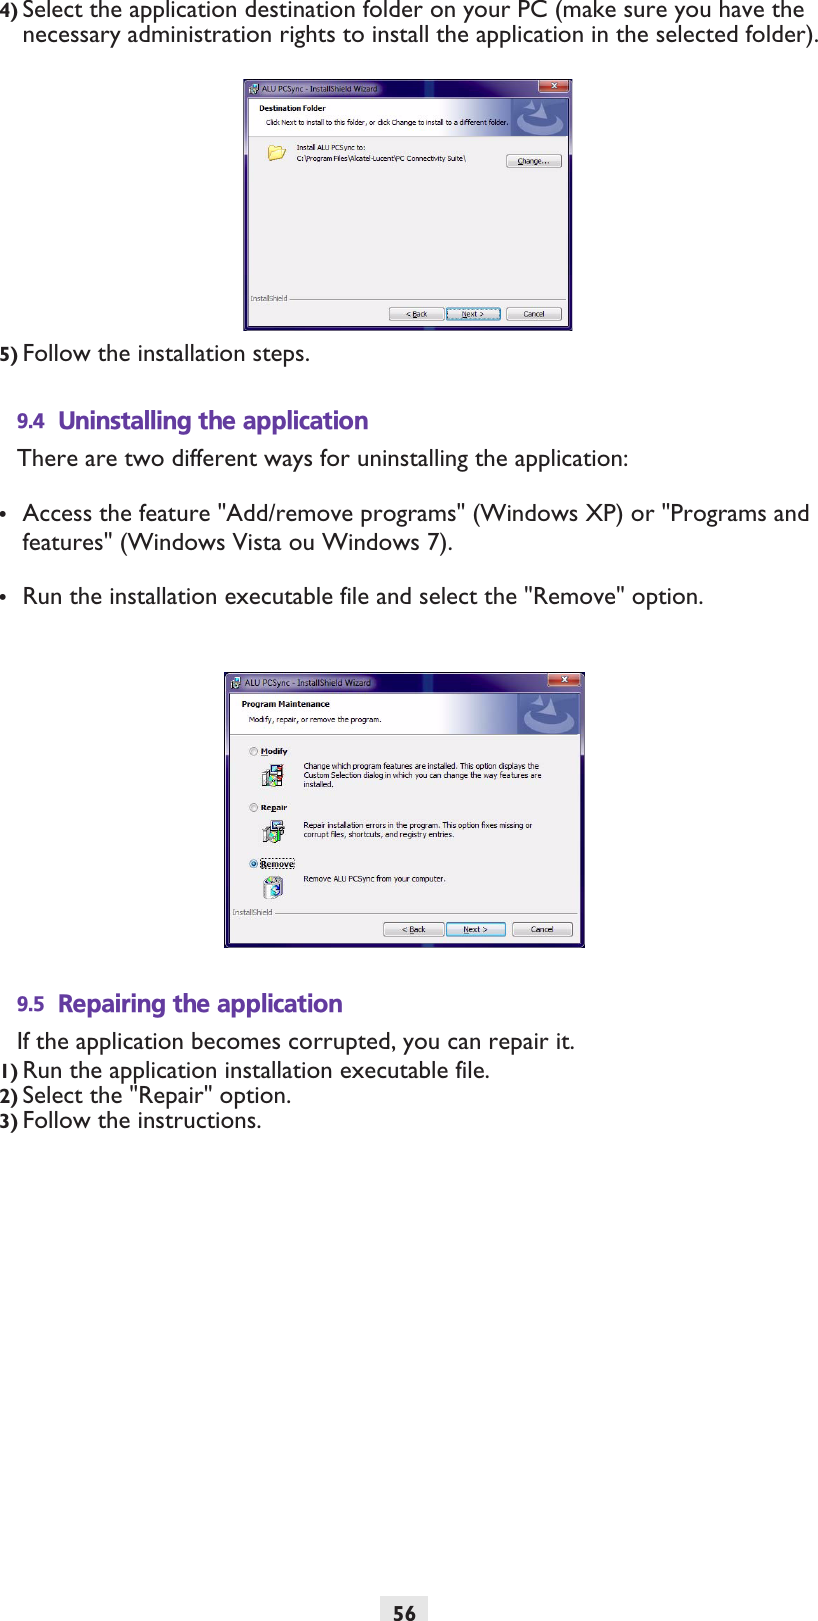 564) Select the application destination folder on your PC (make sure you have the necessary administration rights to install the application in the selected folder).5) Follow the installation steps.9.4 Uninstalling the applicationThere are two different ways for uninstalling the application:•Access the feature &quot;Add/remove programs&quot; (Windows XP) or &quot;Programs and features&quot; (Windows Vista ou Windows 7).•Run the installation executable file and select the &quot;Remove&quot; option.9.5 Repairing the applicationIf the application becomes corrupted, you can repair it. 1) Run the application installation executable file.2) Select the &quot;Repair&quot; option.3) Follow the instructions. 